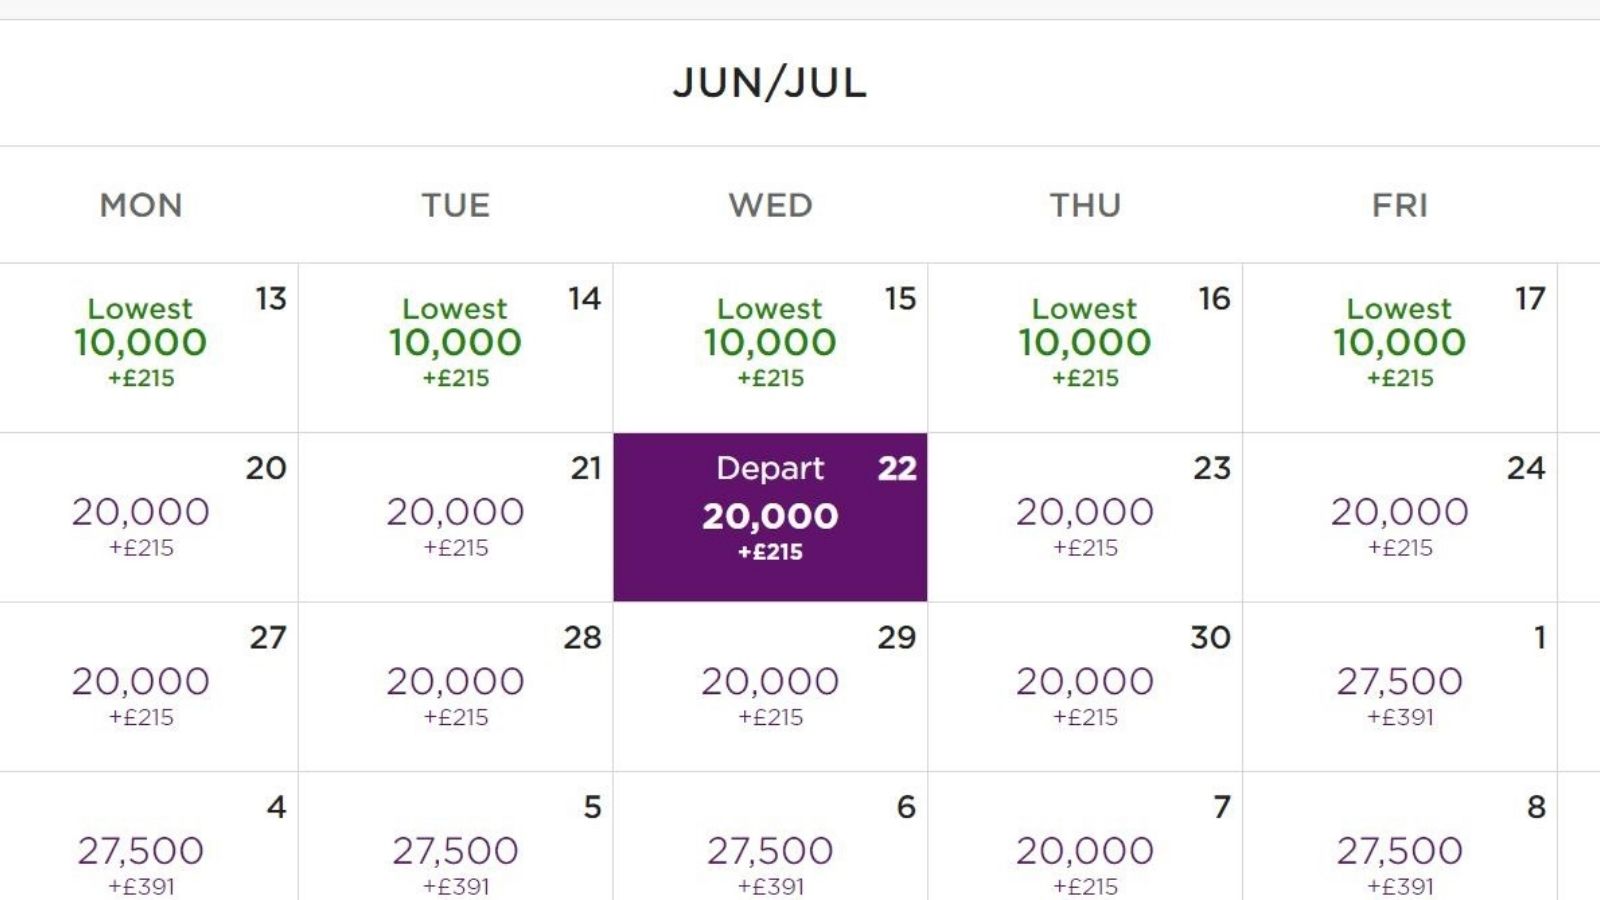 The Virgin Atlantic monthly award calendar still exists. Here's how to